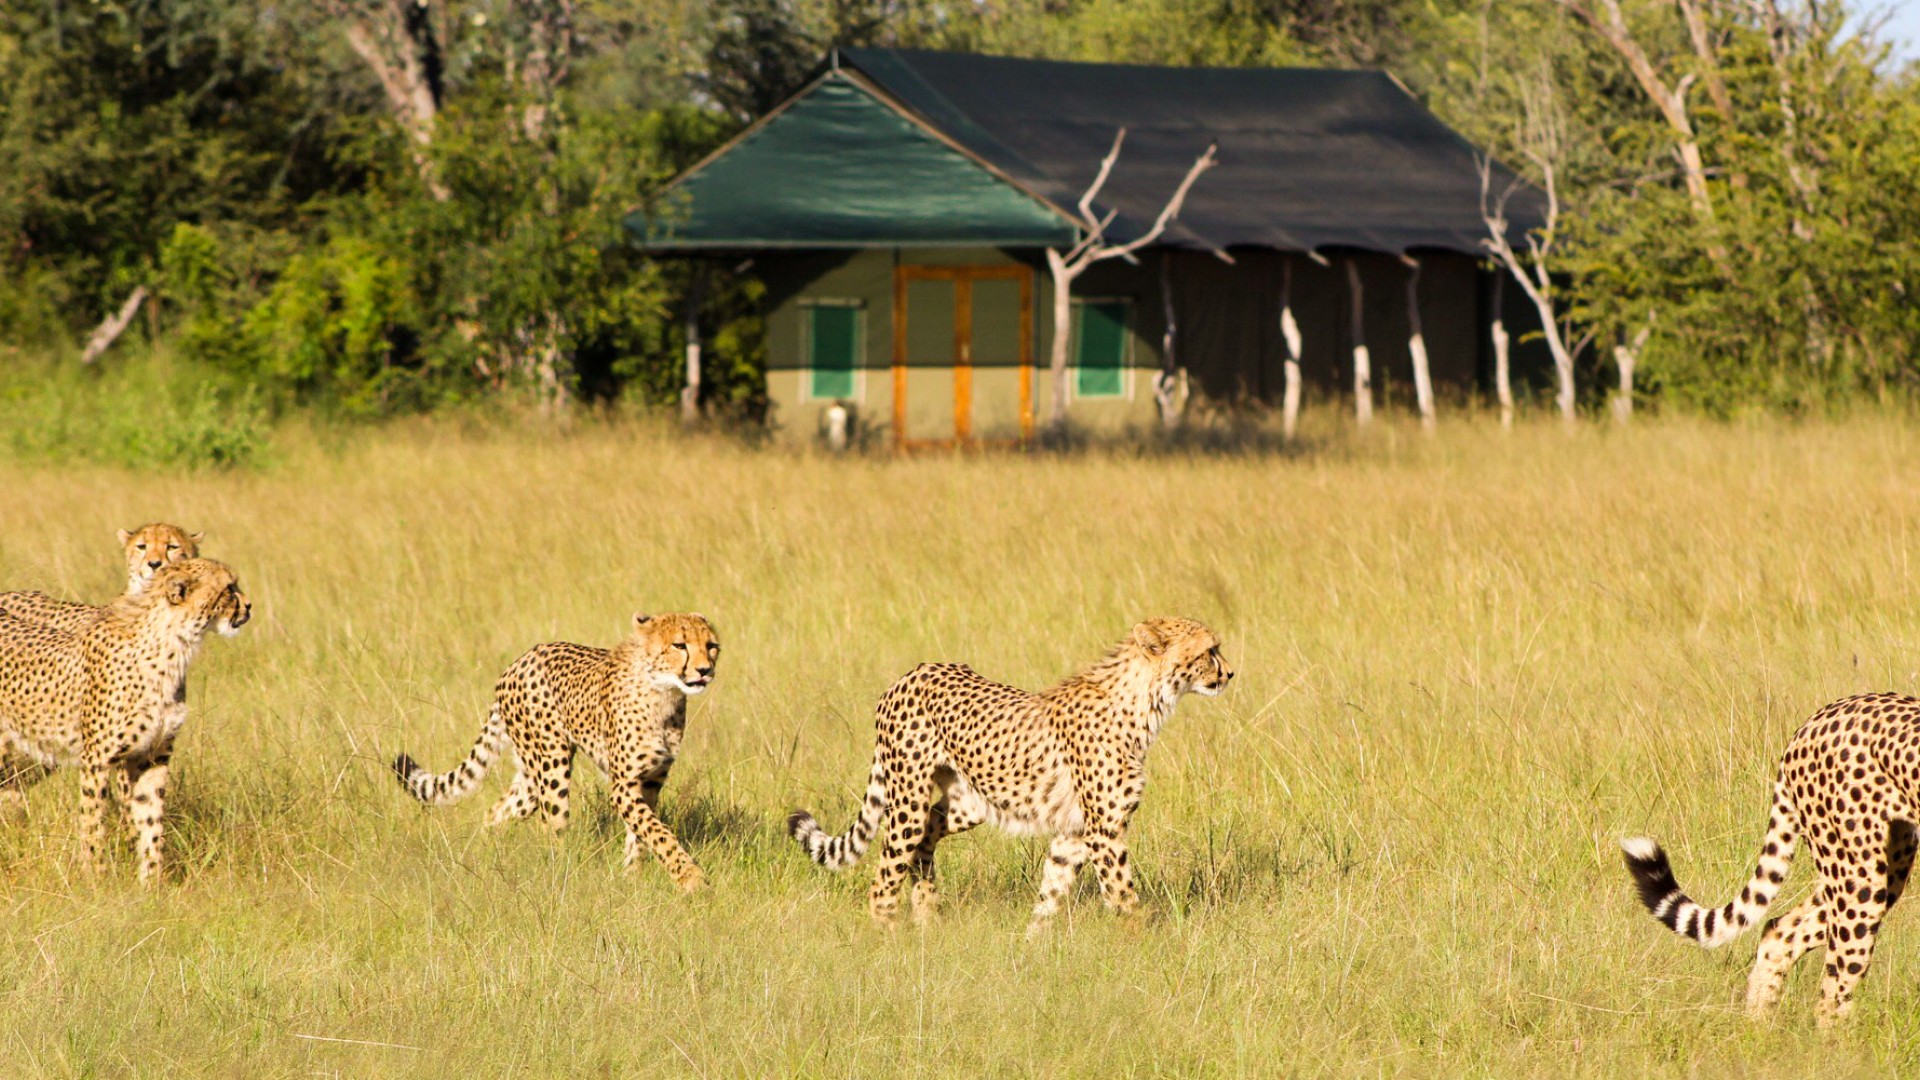 cheetahs strolling through grass in front of tent 